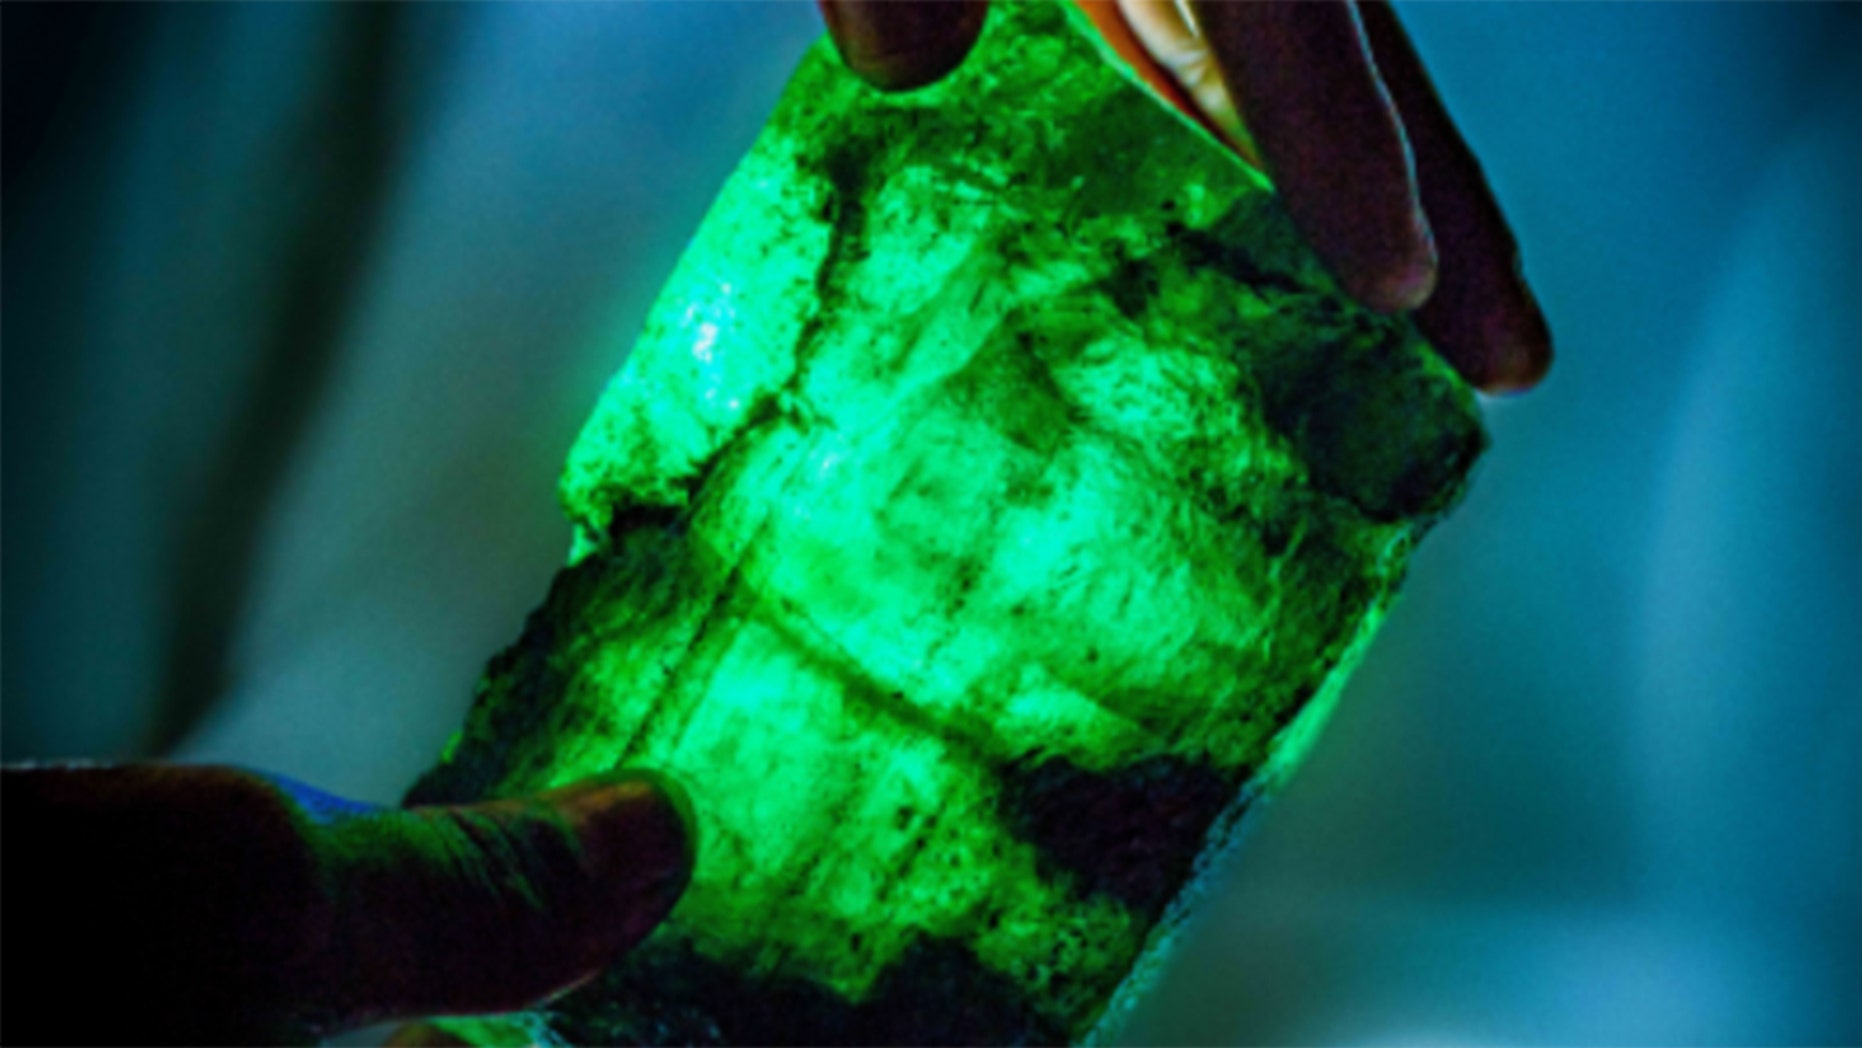 On October 2, 2018, miners discovered a large emerald crystal inside the largest emerald mine in the world in Zambia.